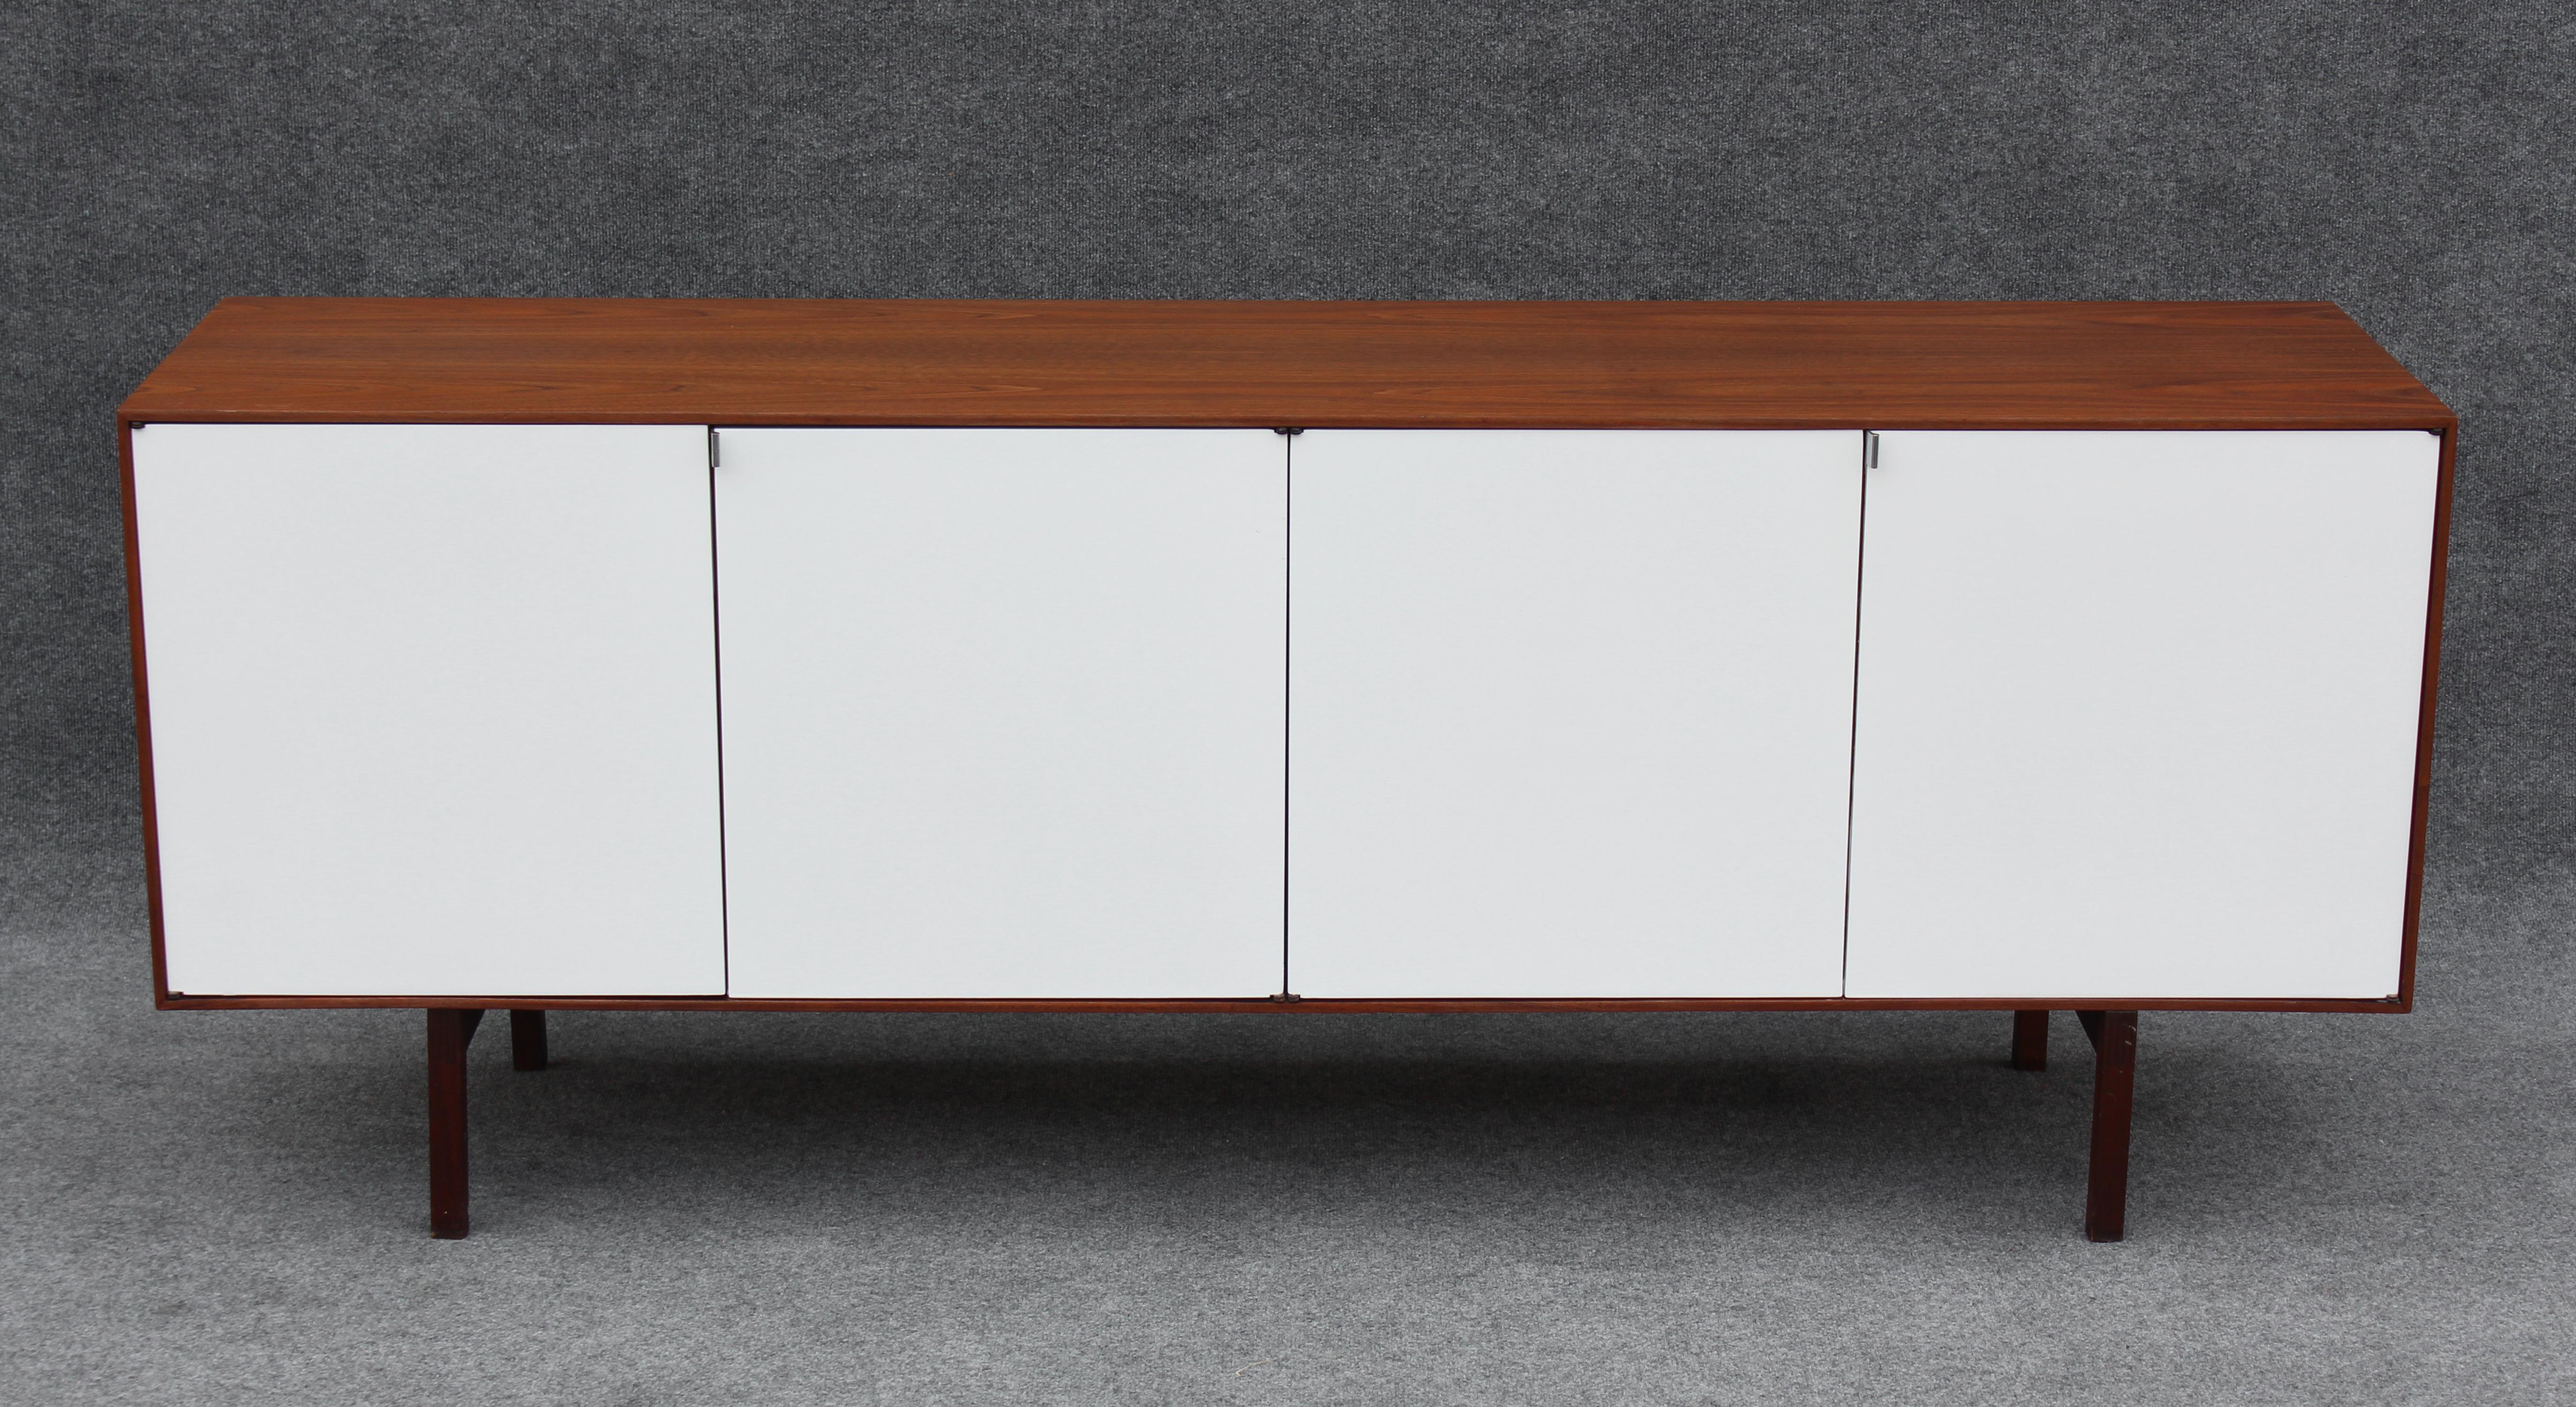 This iconic cabinet was designed in the 1960s by Florence Knoll and manufactured by Knoll International for sale in the heart of New York City on Park Avenue. Built of a finely grained walnut, its contrast with its white doors makes for a very